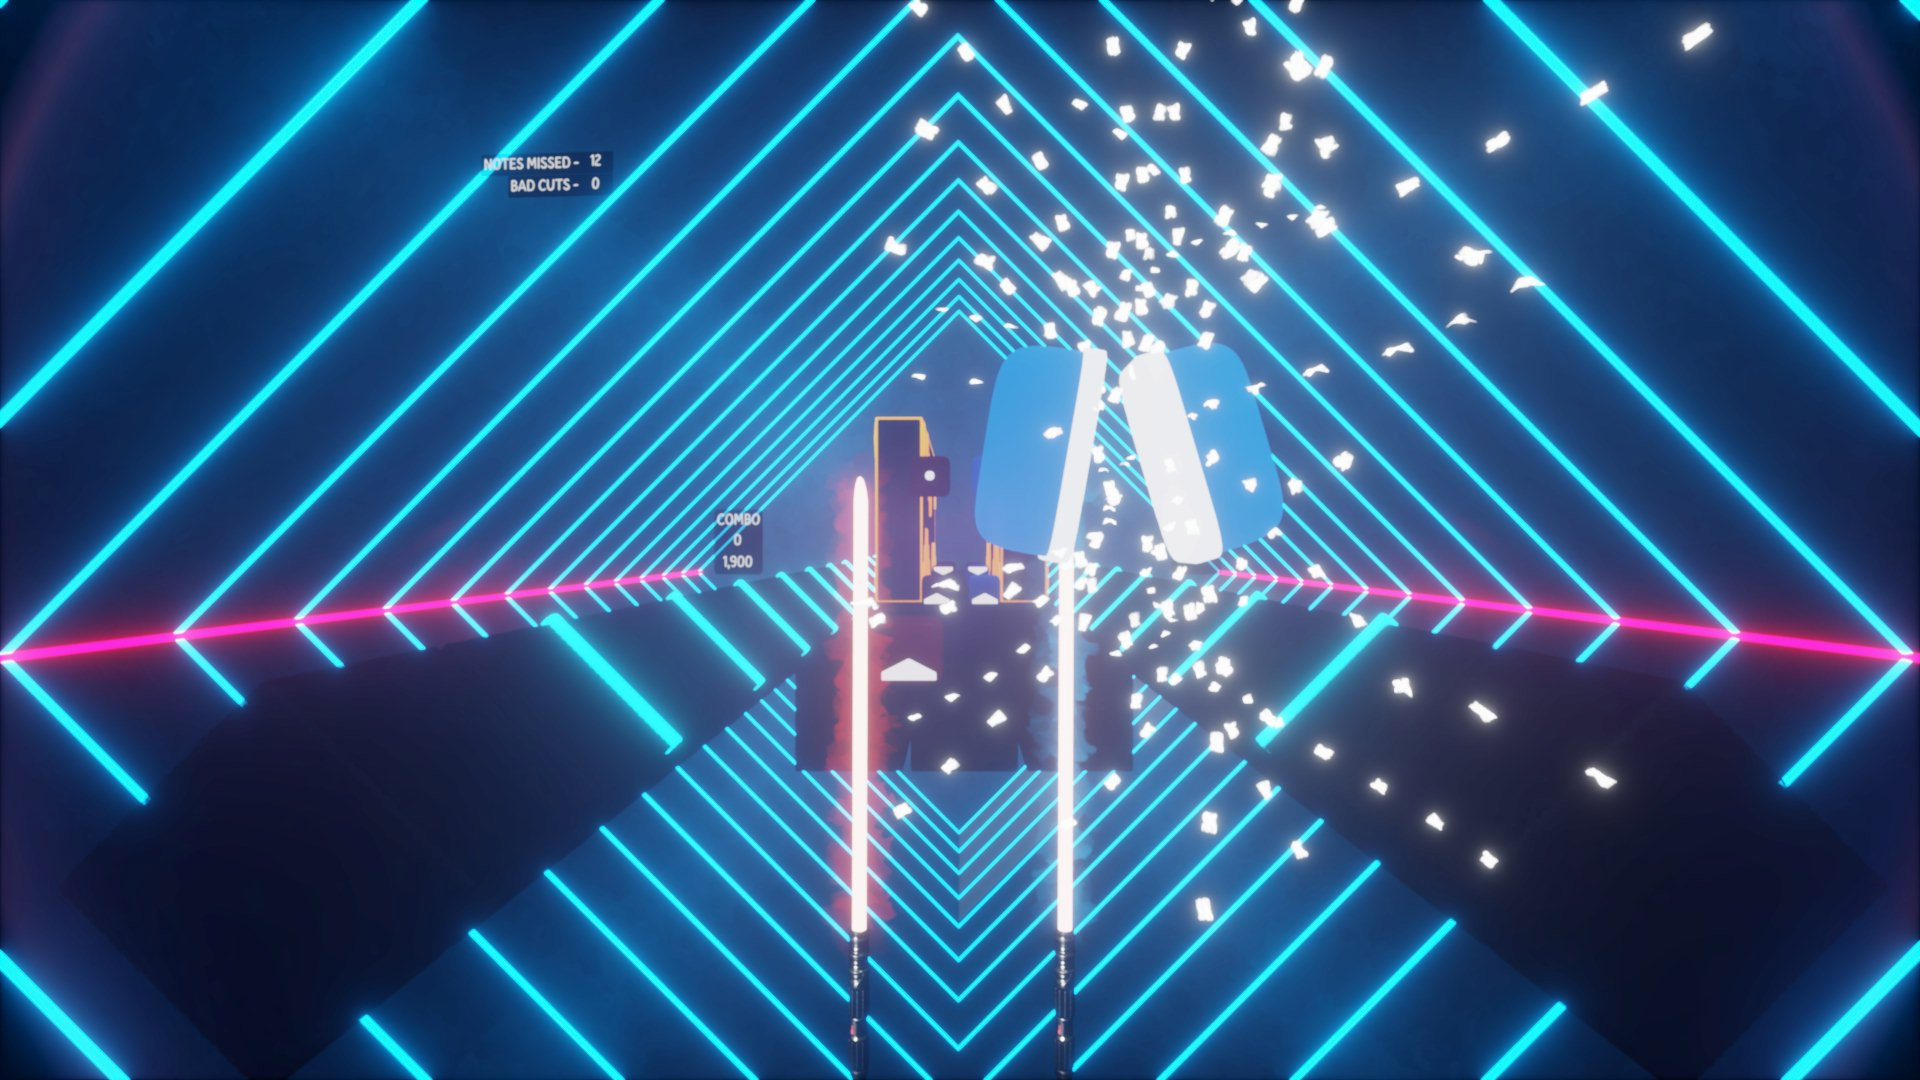 Made Beat Saber Inside of Dreams to VR